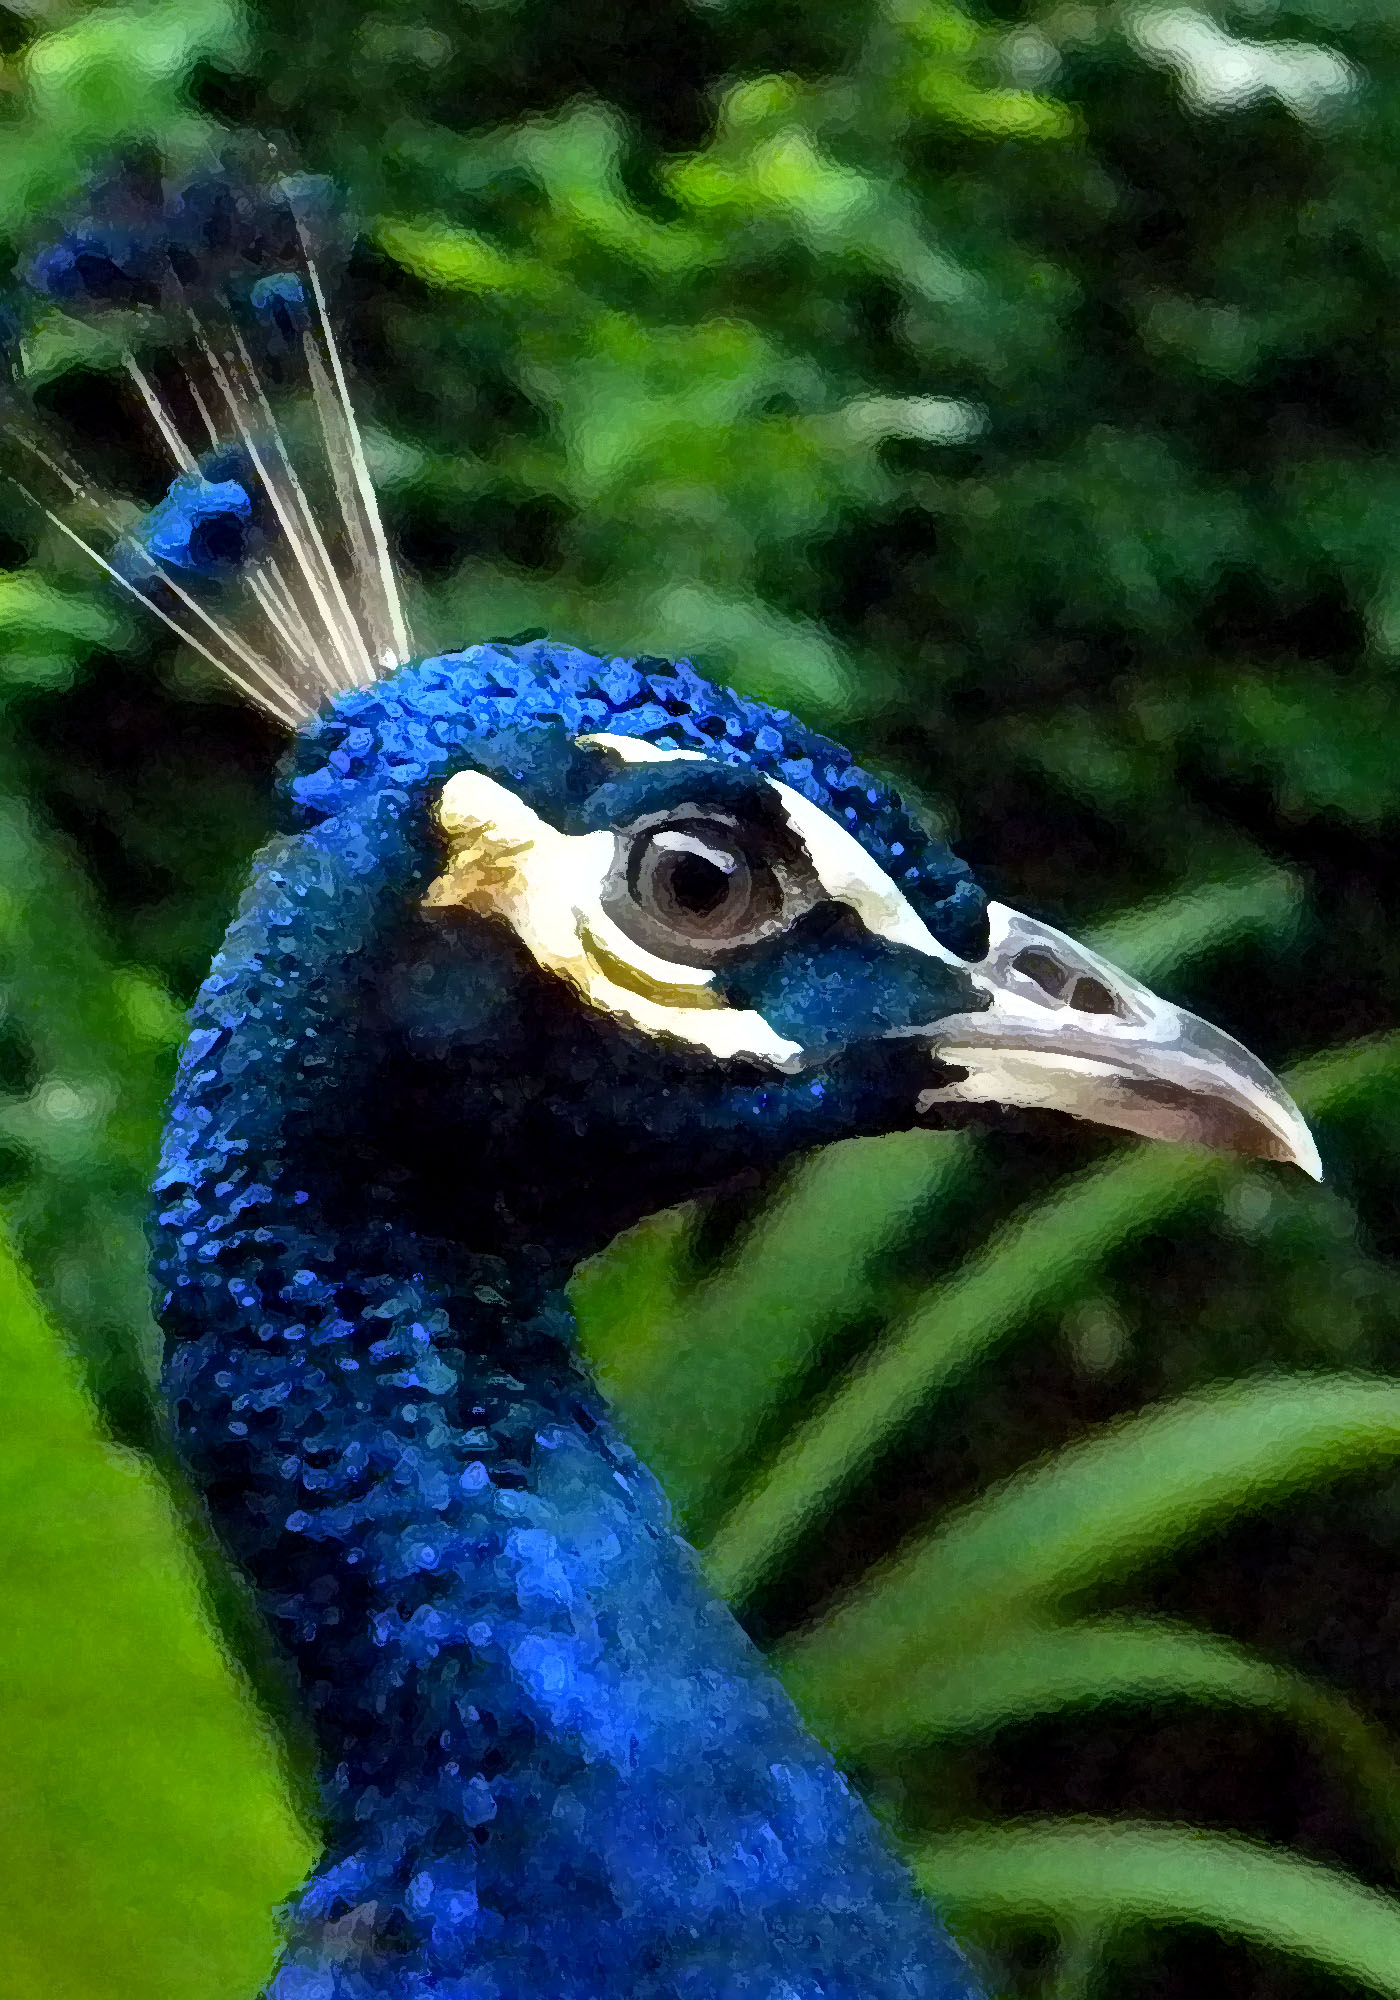 a blue bird with white head and feathers